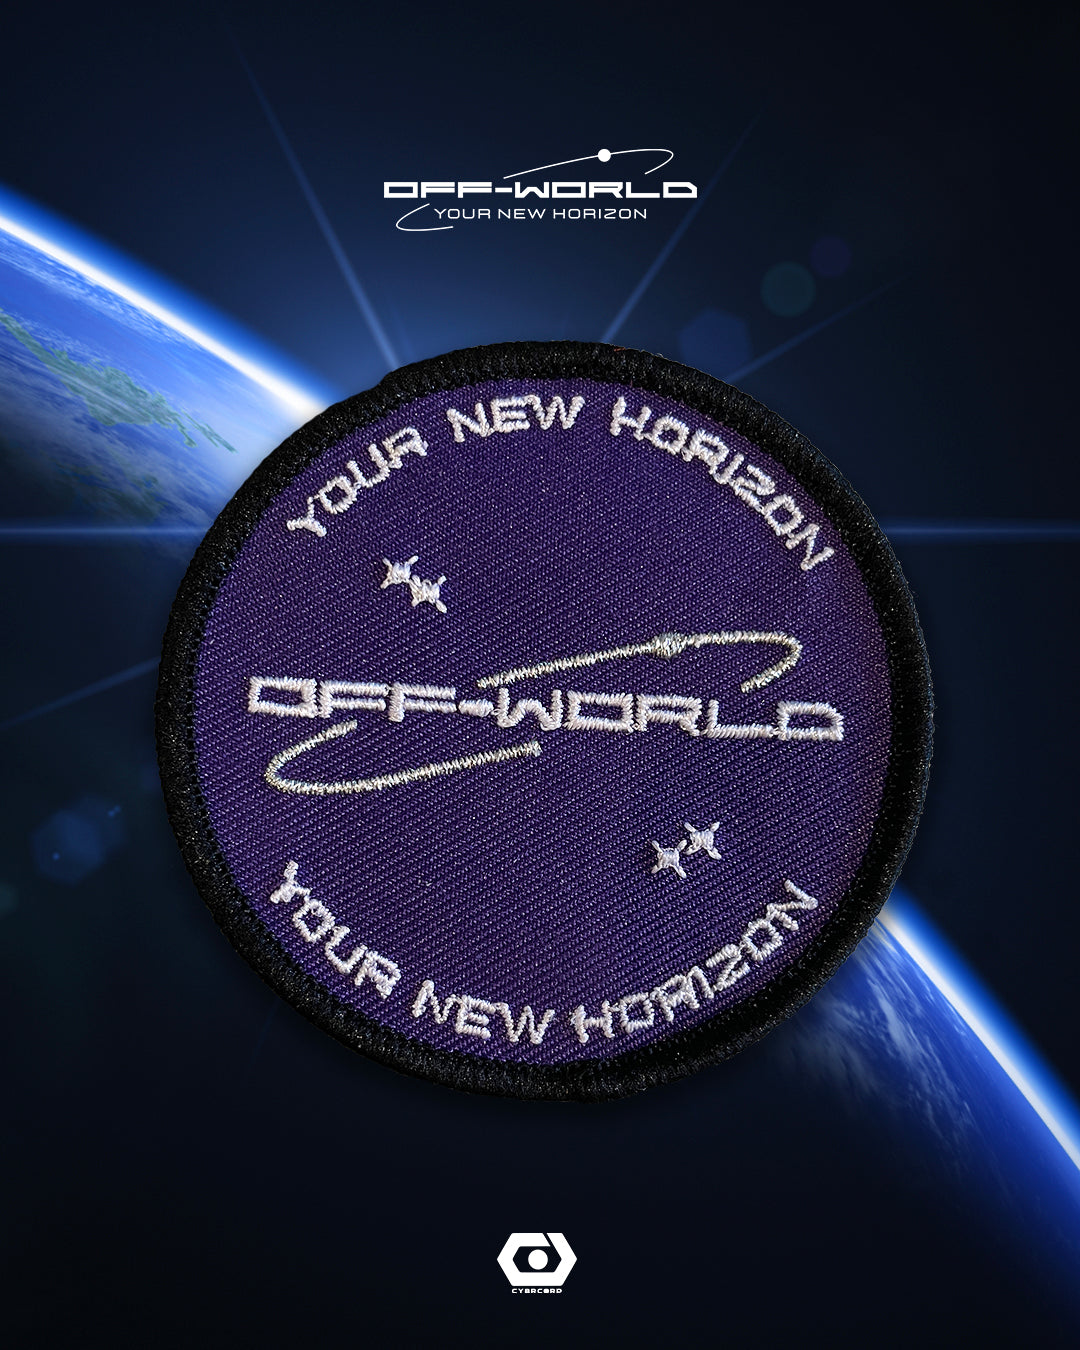 OFF-WORLD MISSION PATCH